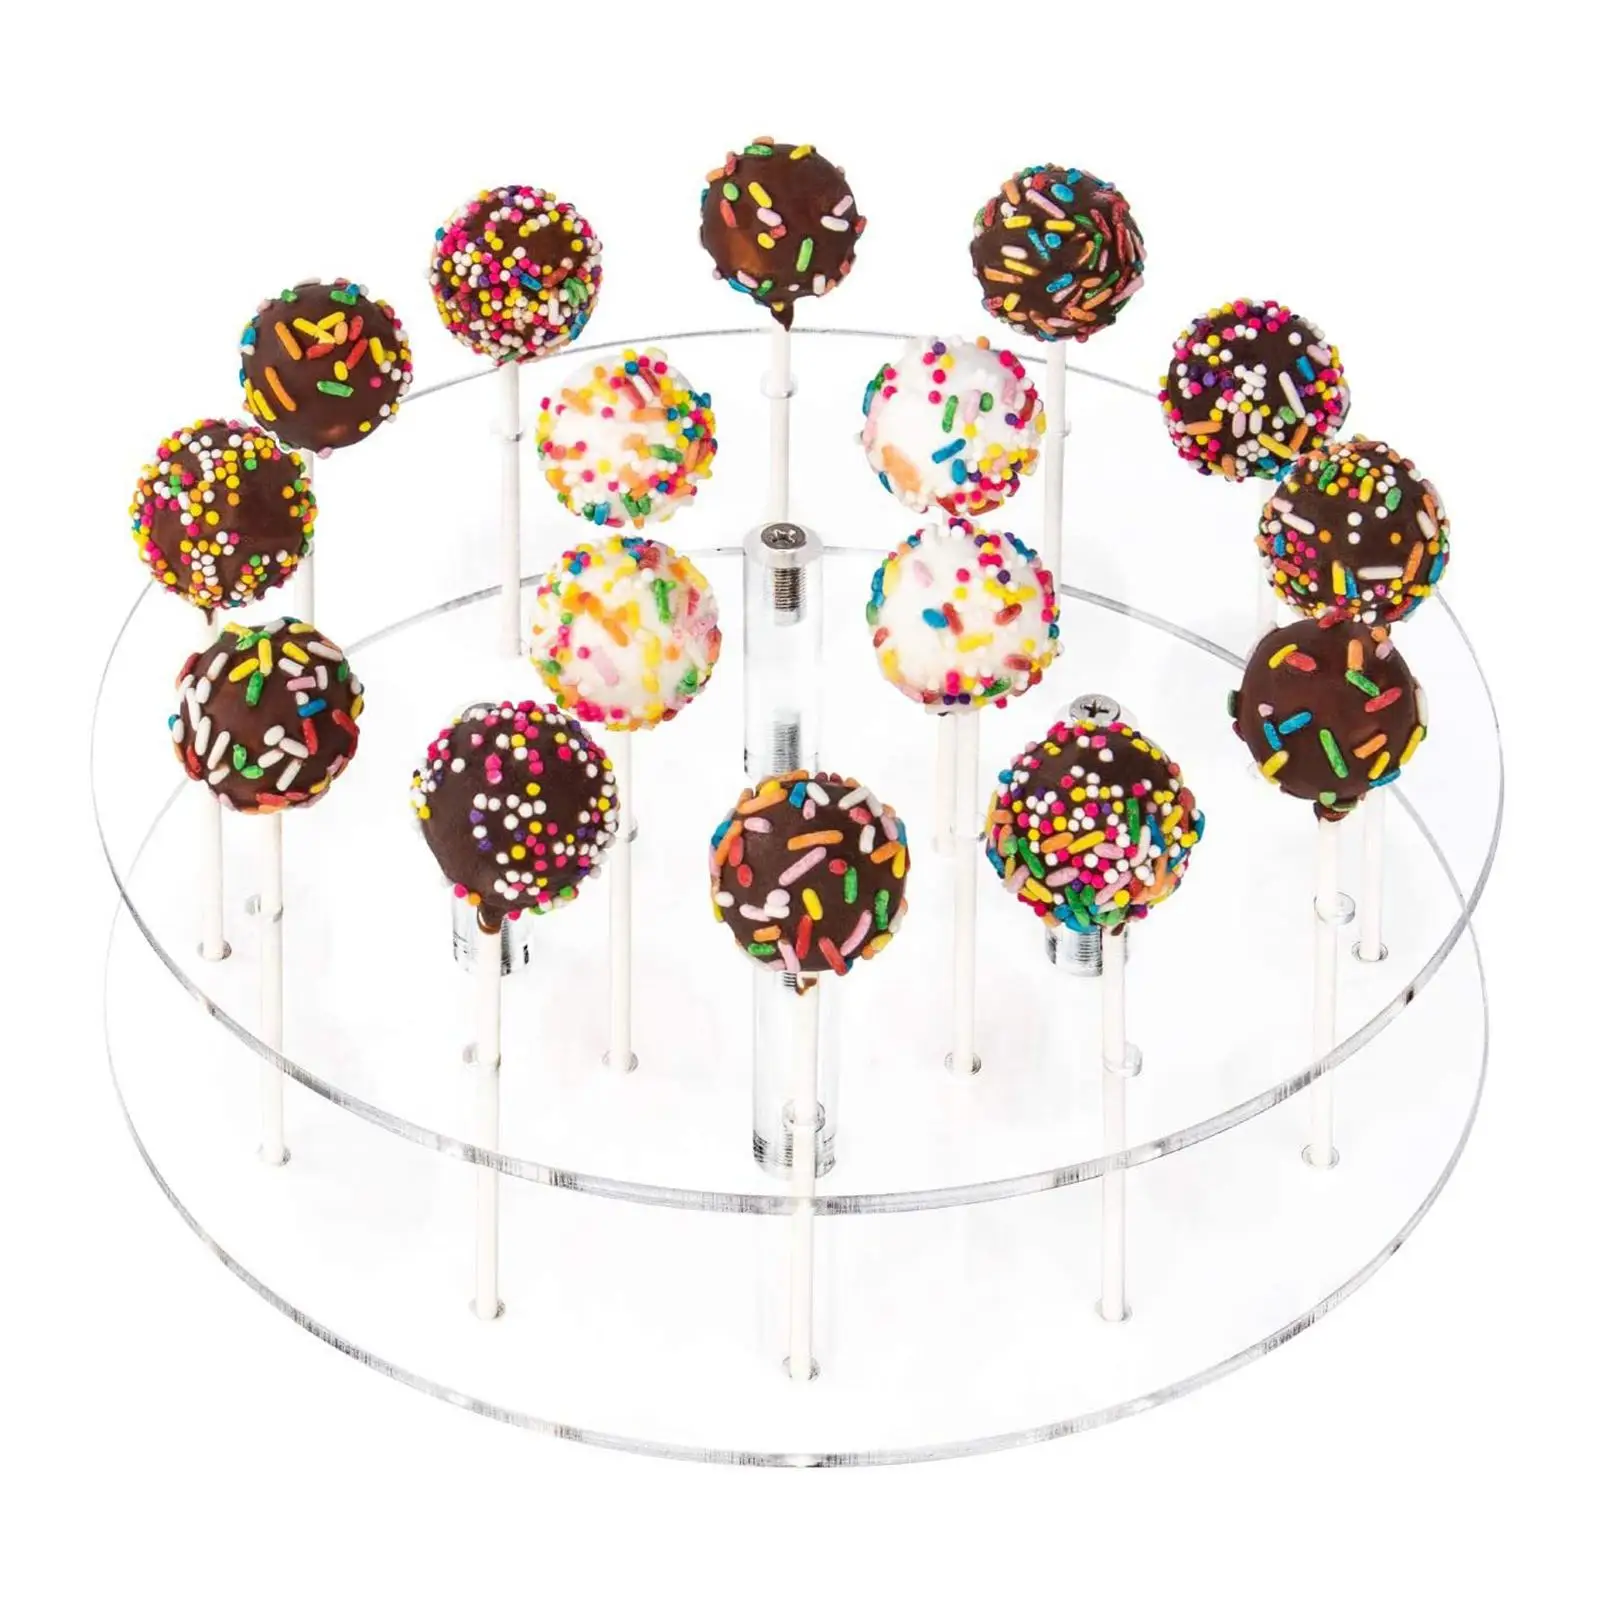 16 Holes Cake Holder, Acrylic Cake Display Stand, Transparent Round Candy Holder for Thanksgiving